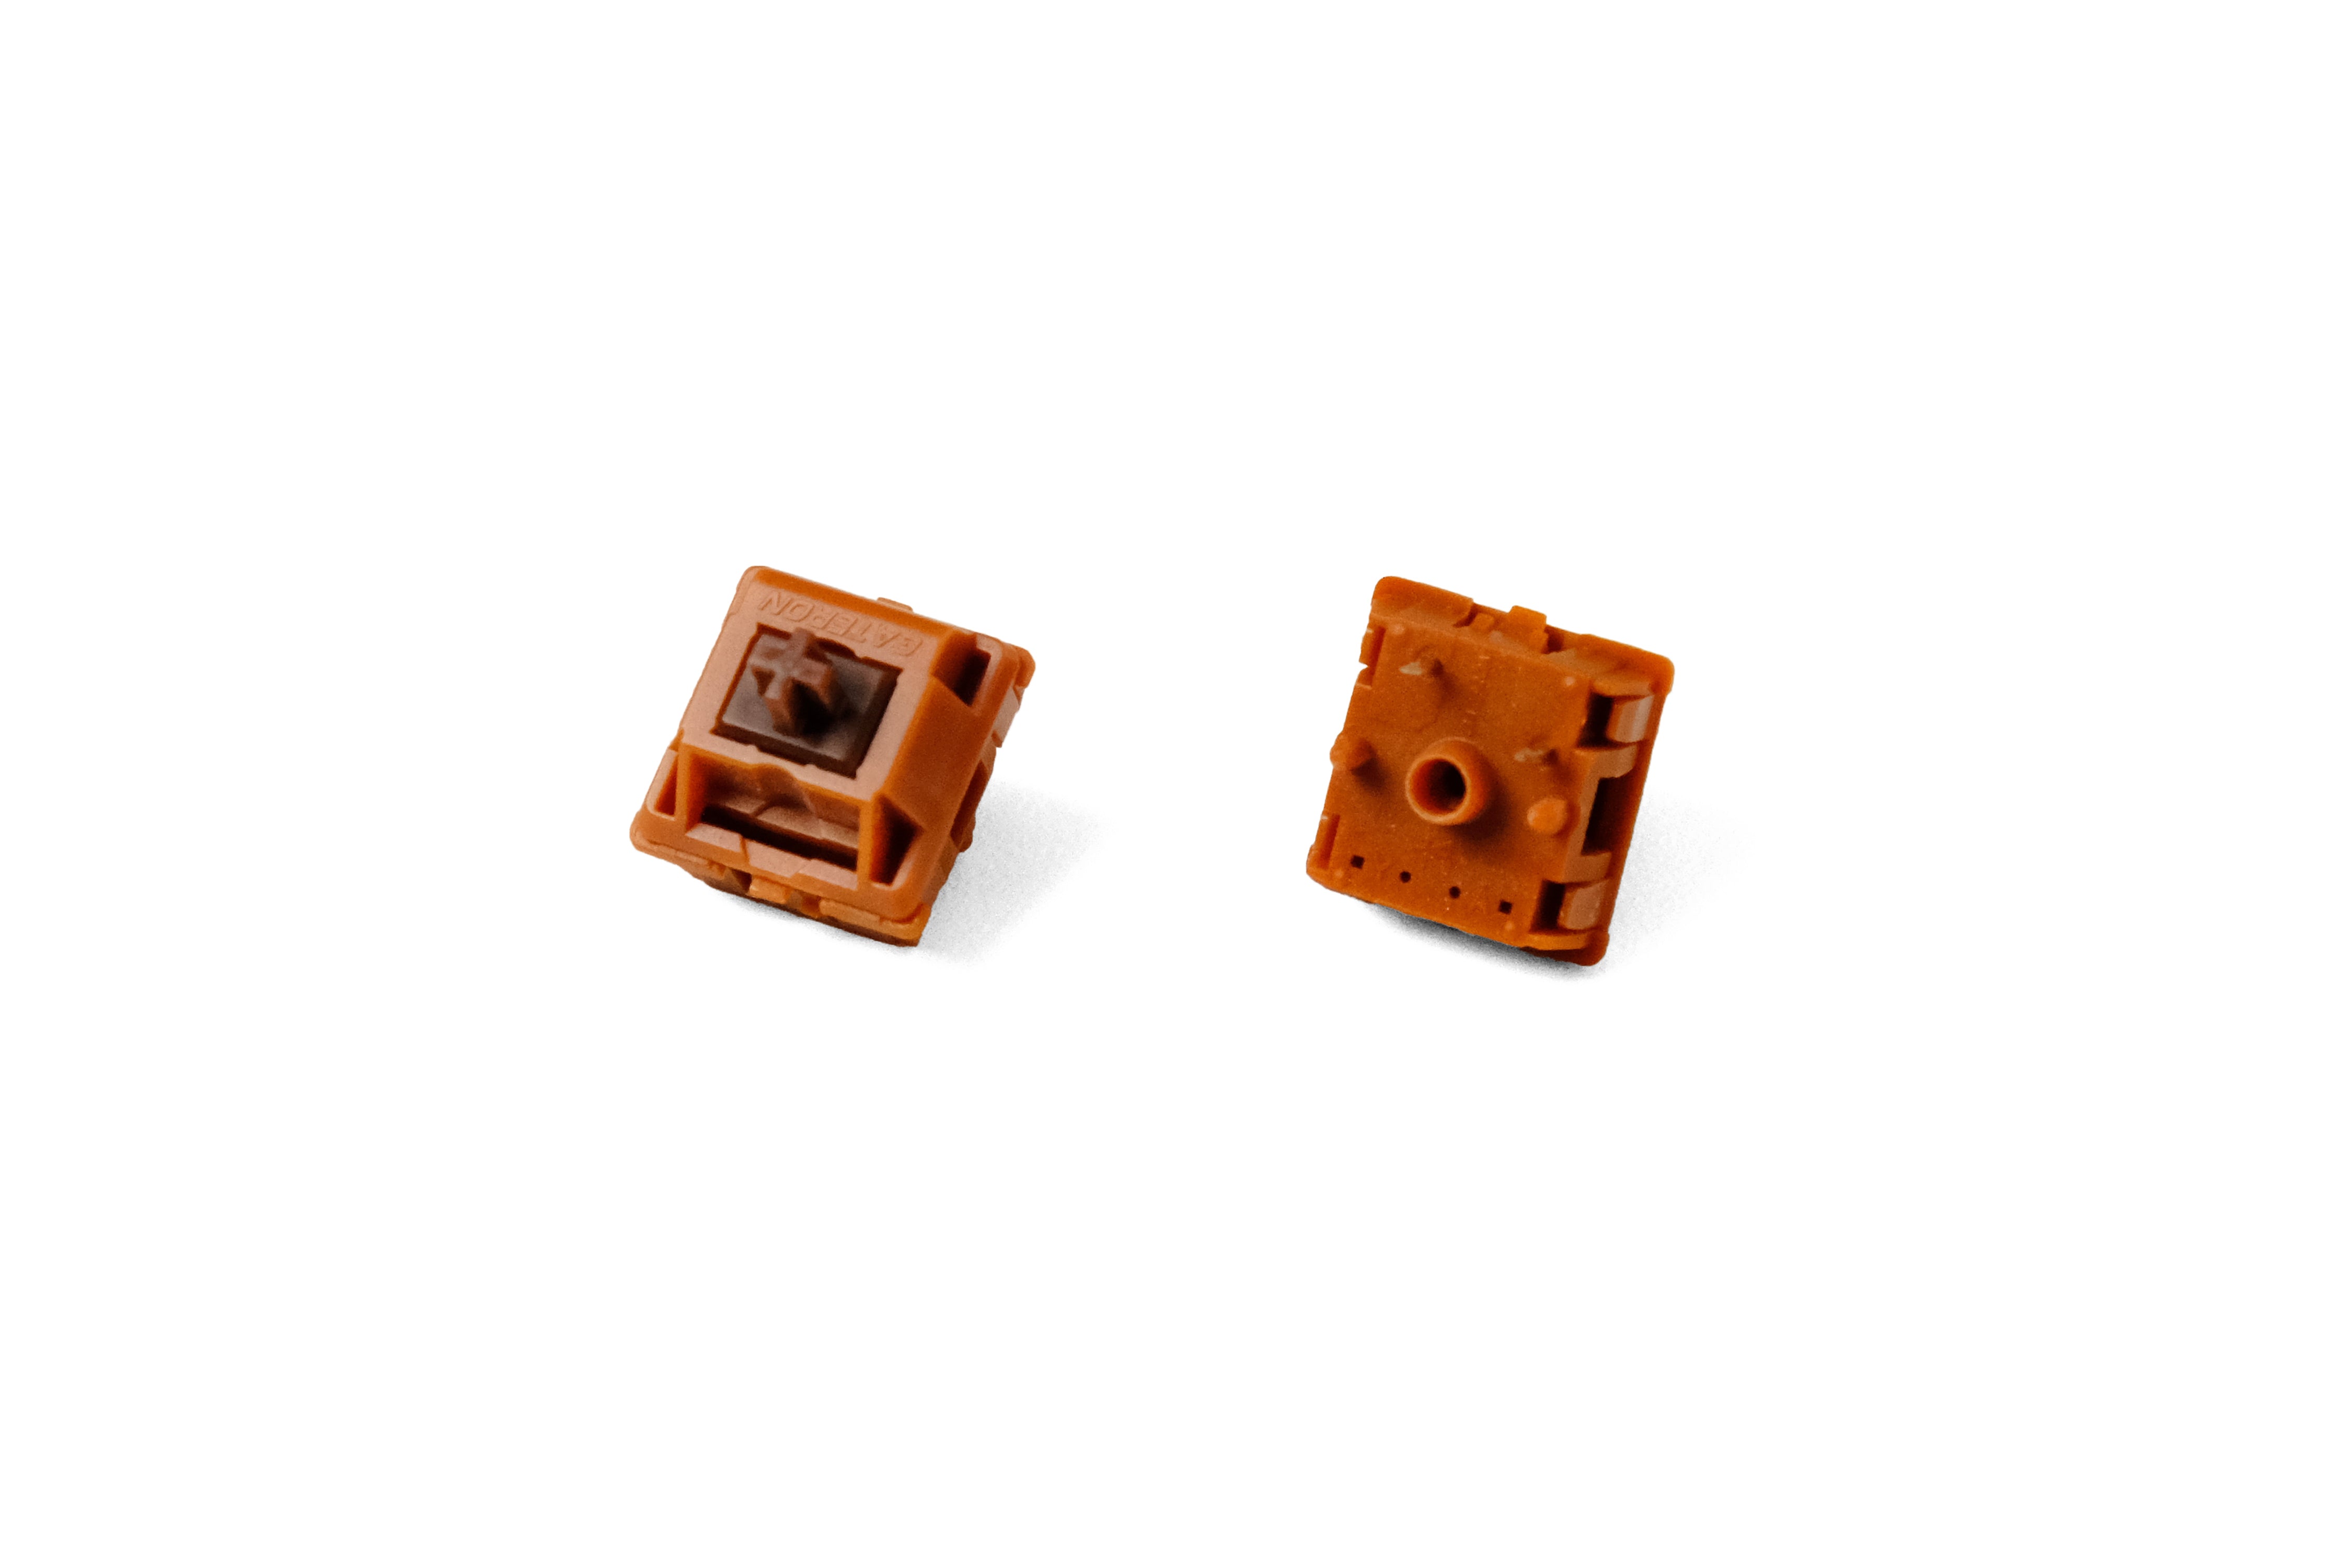 Gateron Cap V2 Golden Brown Tactile Switches at KeebsForAll